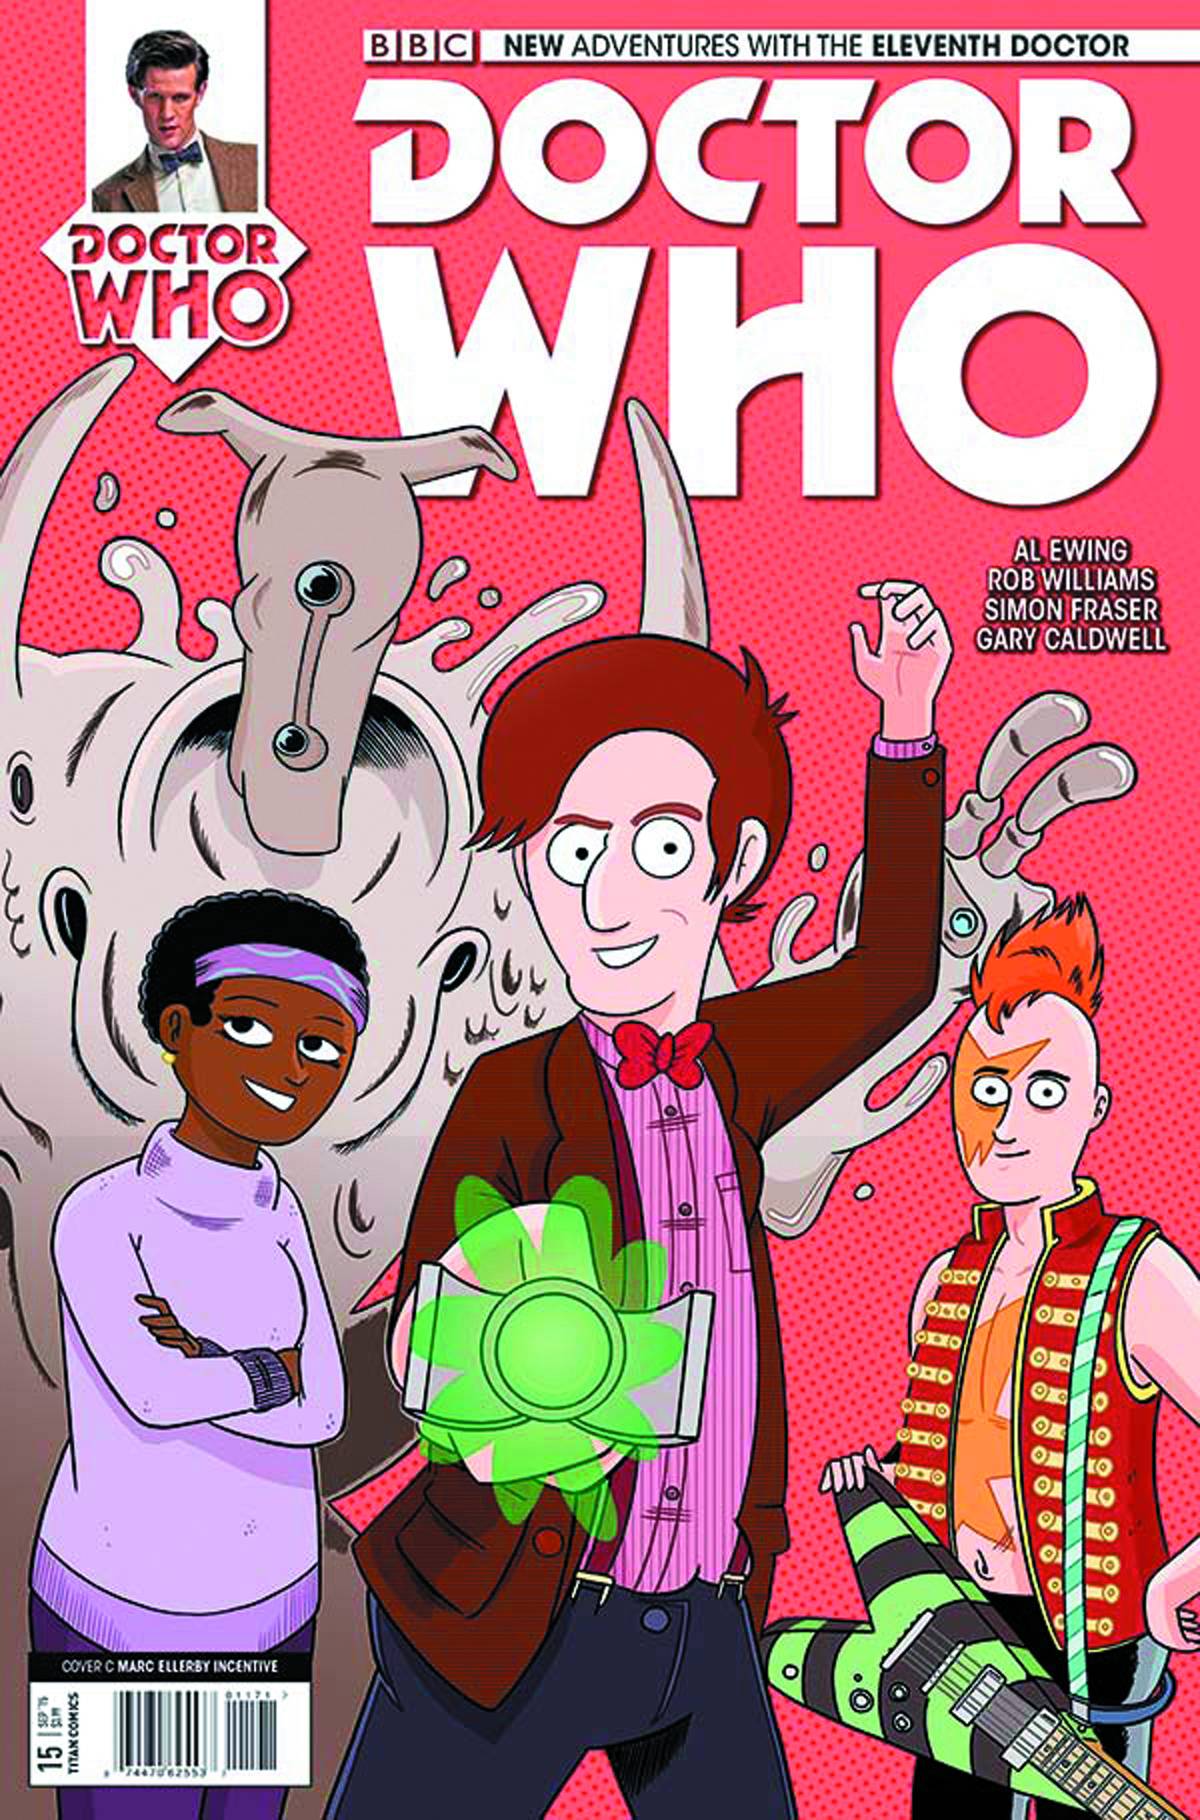 Doctor Who 11th #15 1 for 10 Incentive Ellerby